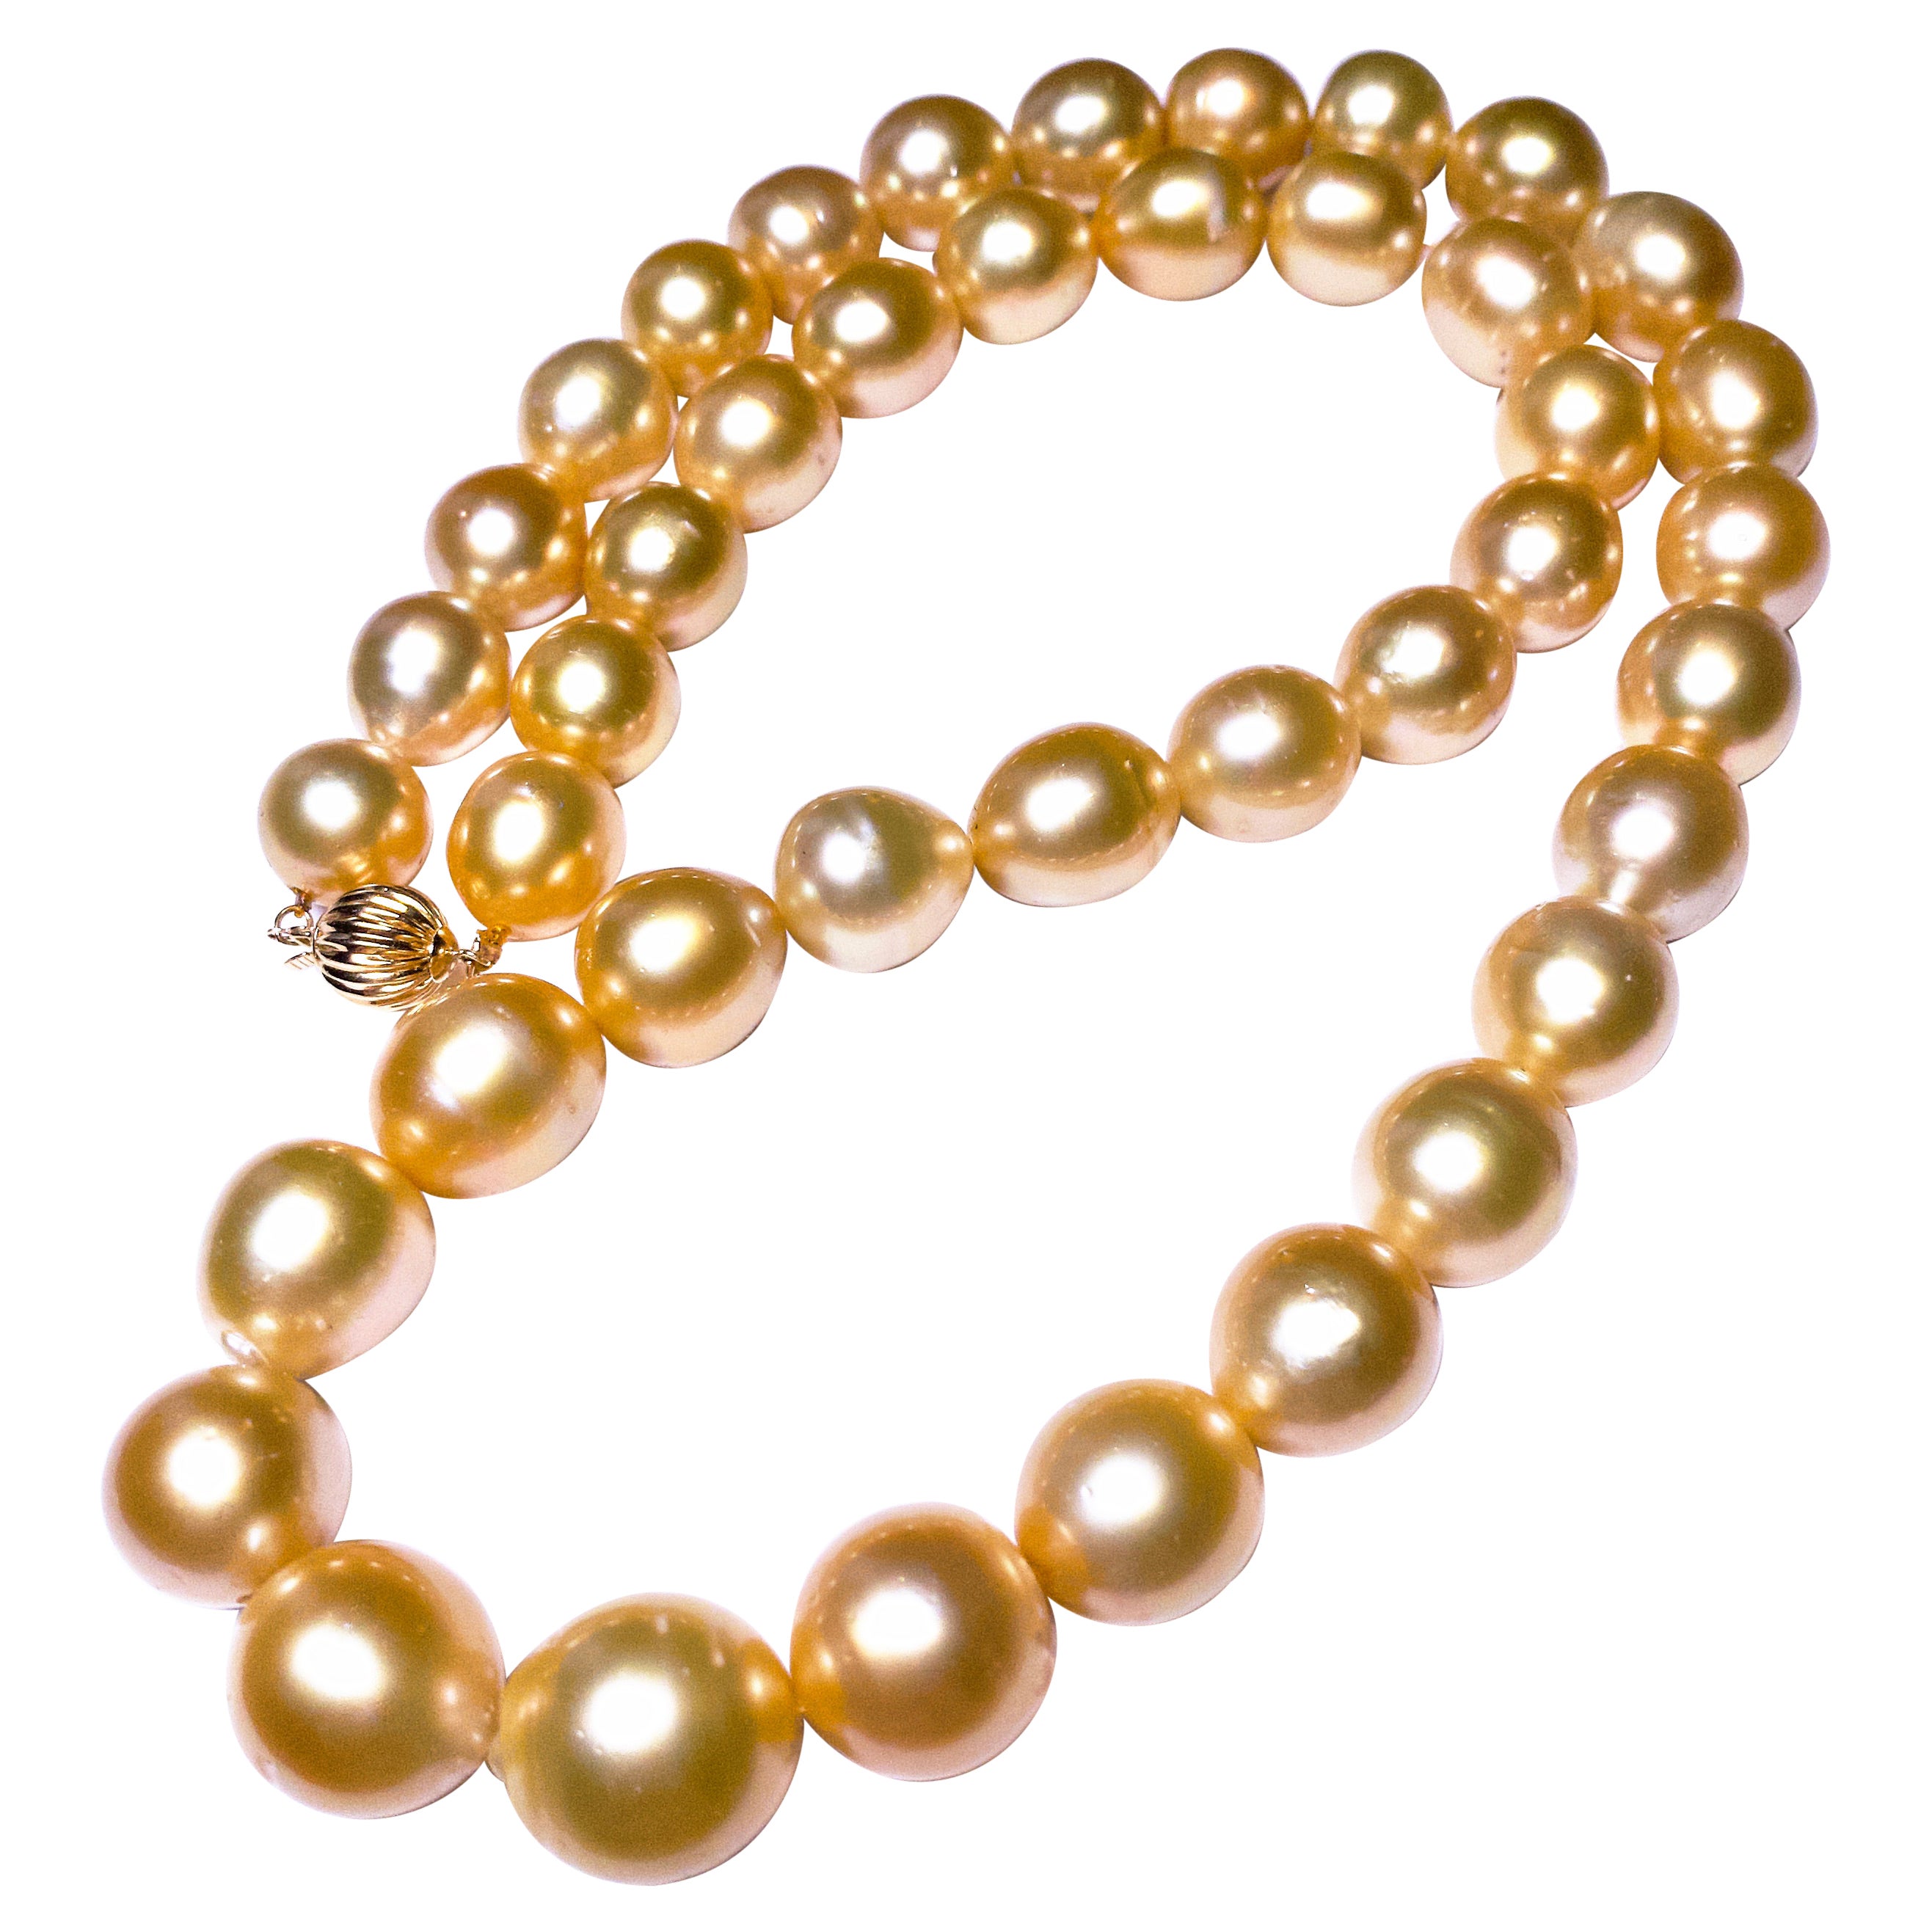 Golden Colour South Sea Pearl Necklace with 18k Gold Clasp